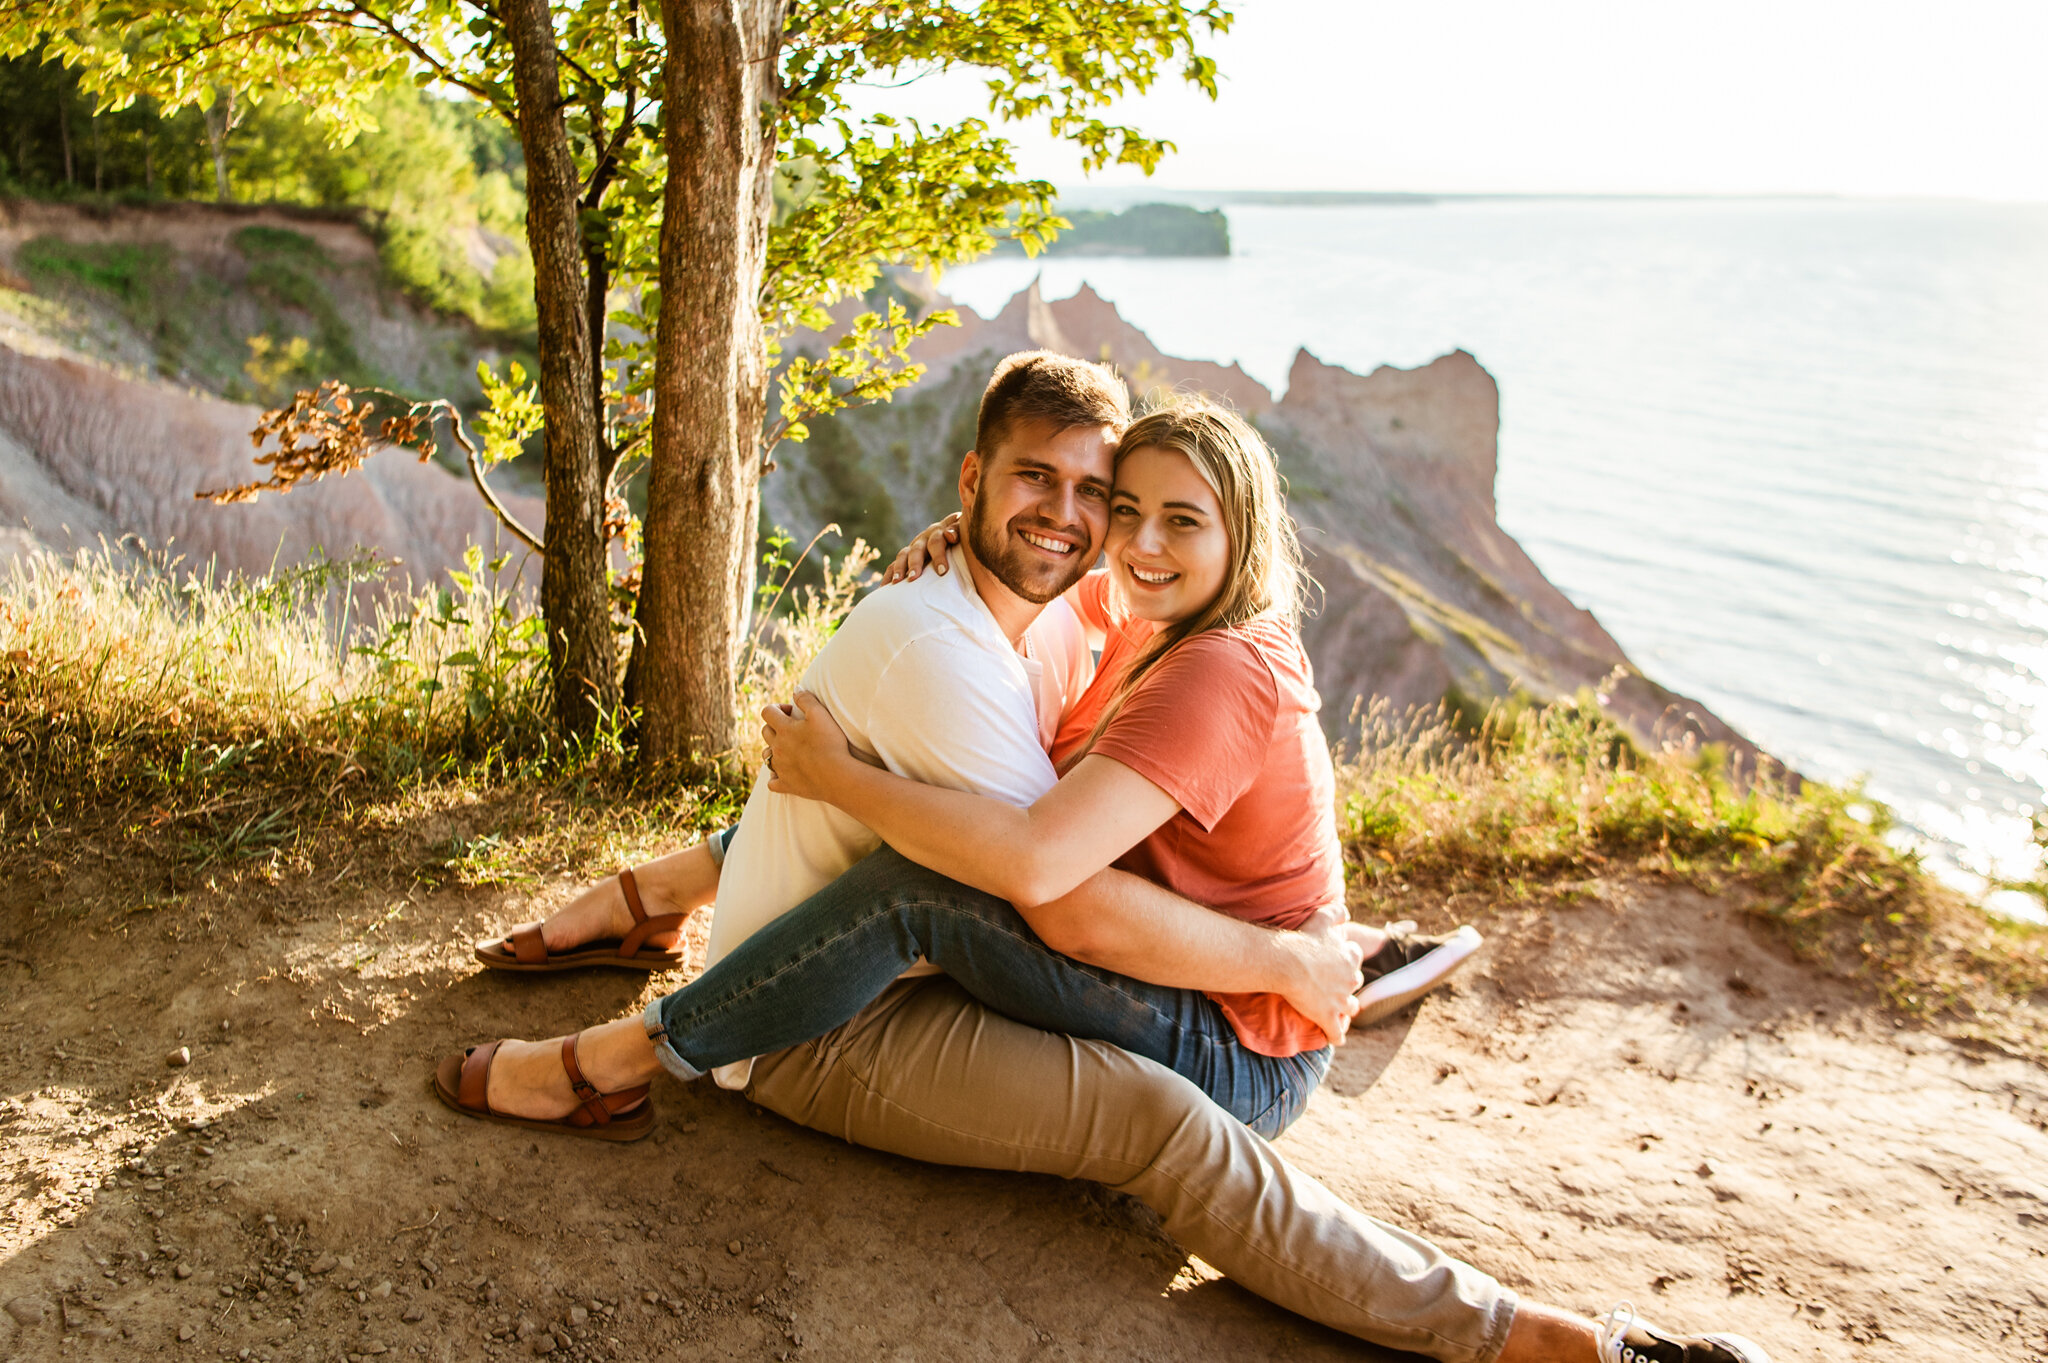 Chimney_Bluffs_State_Park_Rochester_Engagement_Session_JILL_STUDIO_Rochester_NY_Photographer_6846.jpg